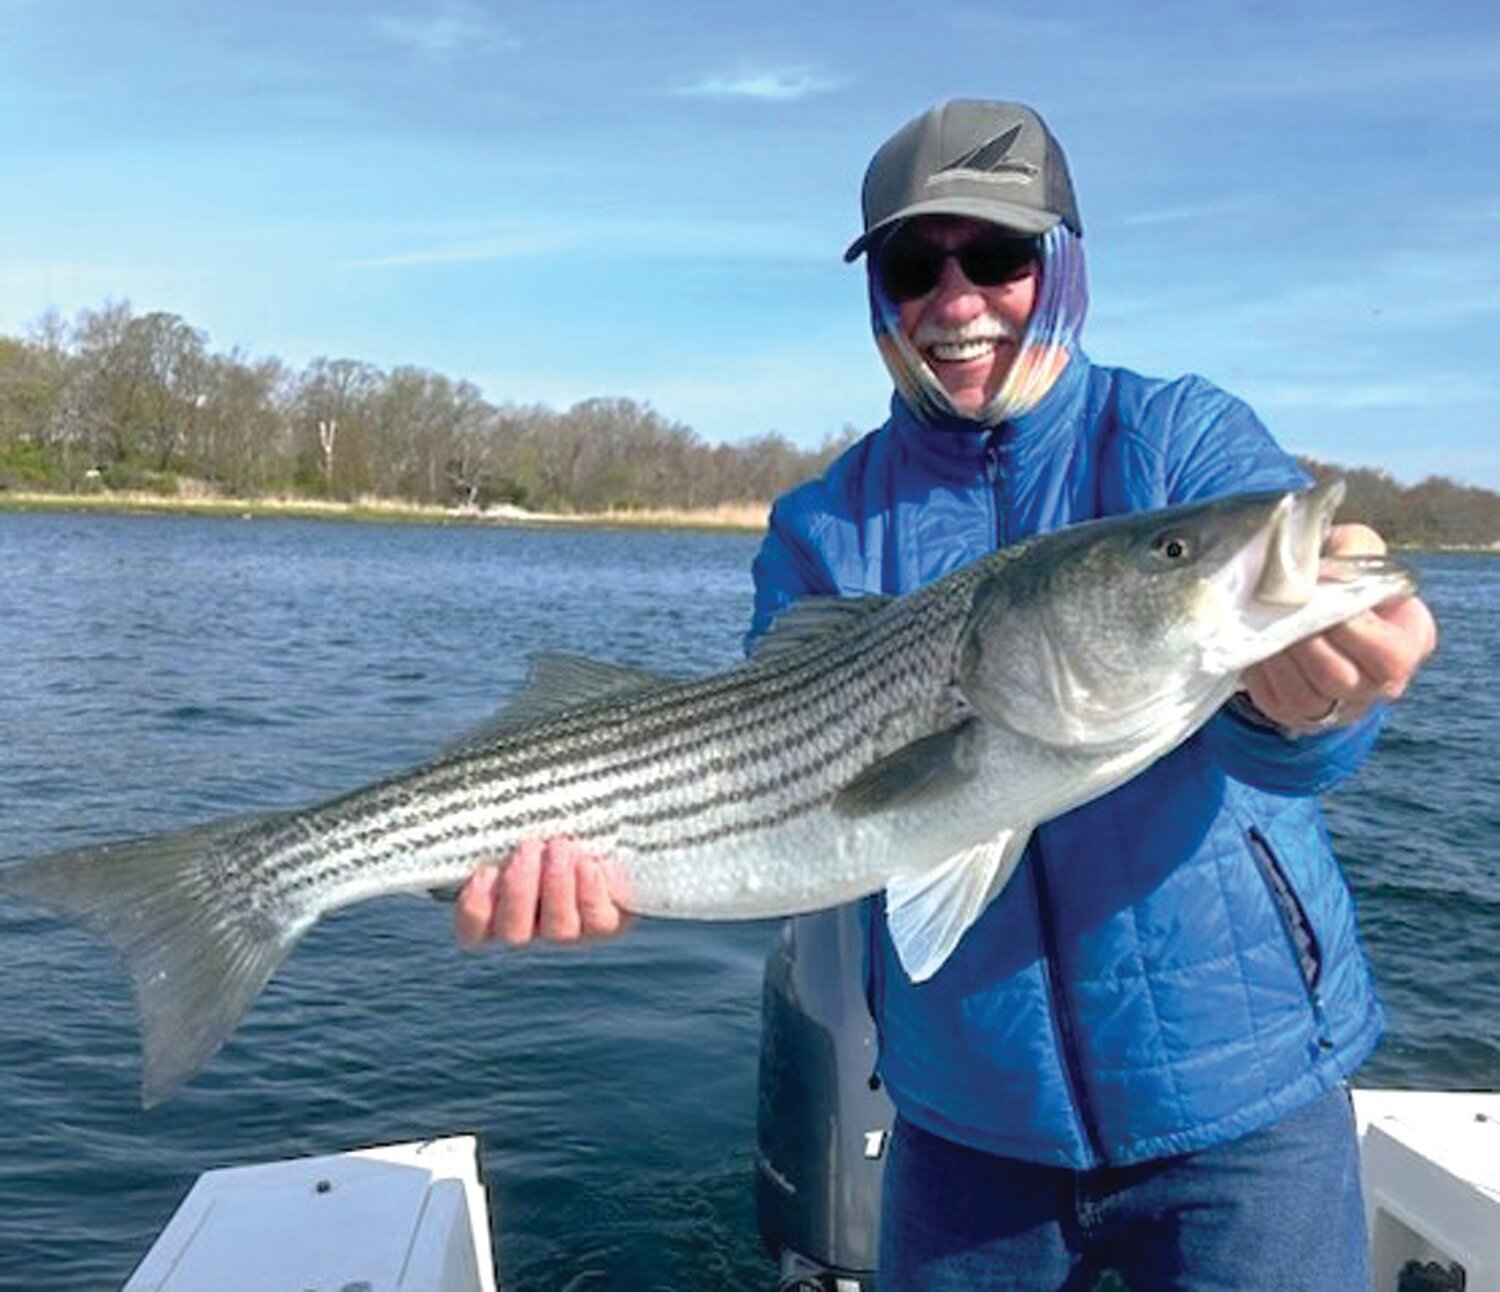 SPRING STRIPED BASS: Jim Lundy with a spring striped bass caught in the East Passage of Narragansett Bay off Prudence Island. (Photo by Fred DeFinis)